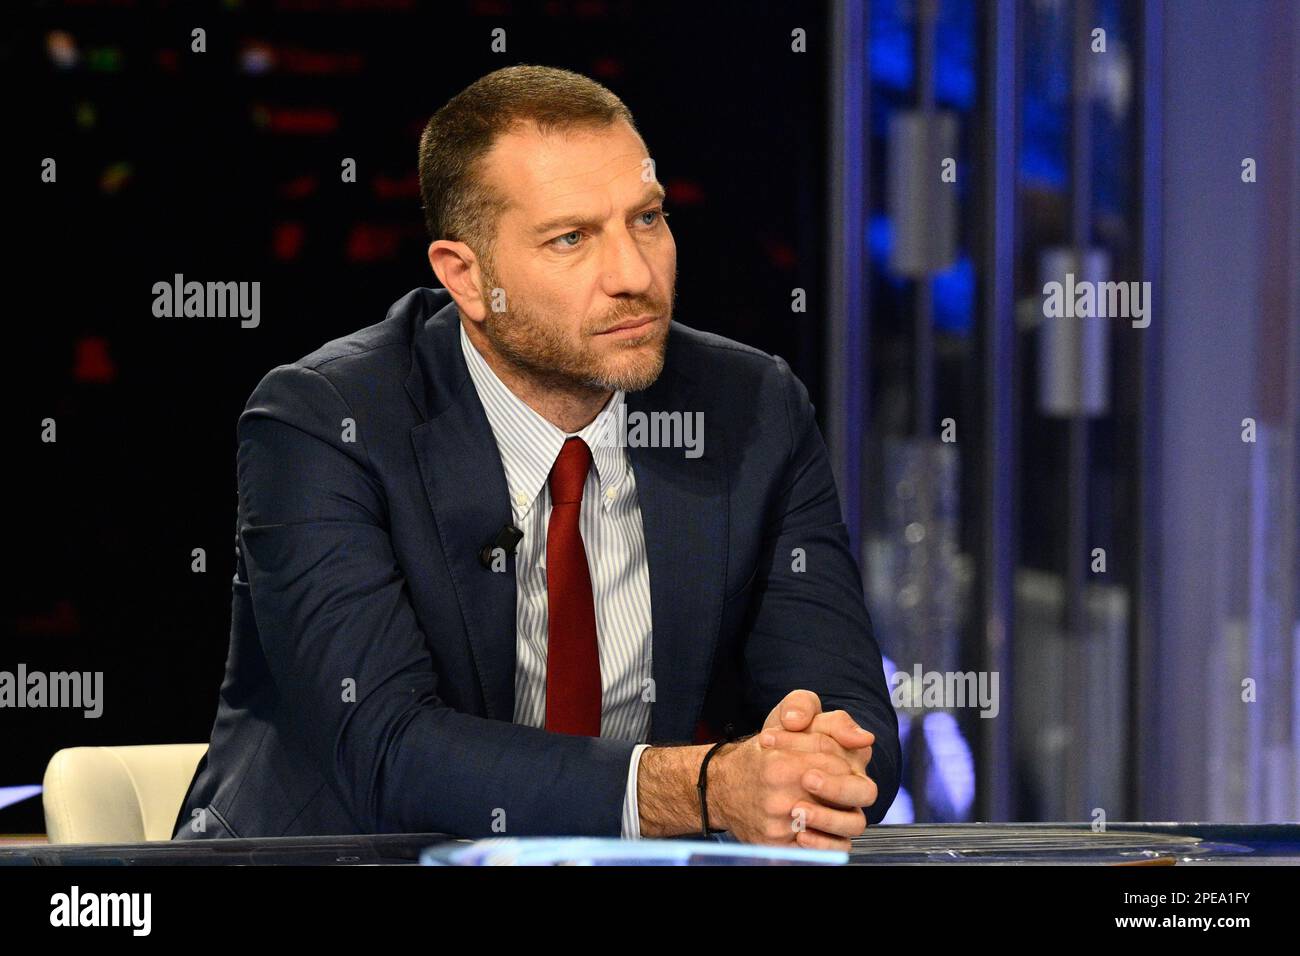 Rome, Italy. 15th Mar, 2023. Daniele Piervincenzi during the Porta a Porta  broadcast on Rai 1 at the Rai studios in Via Teulada on March 15, 2023 in  Rome, Italy. (Photo by